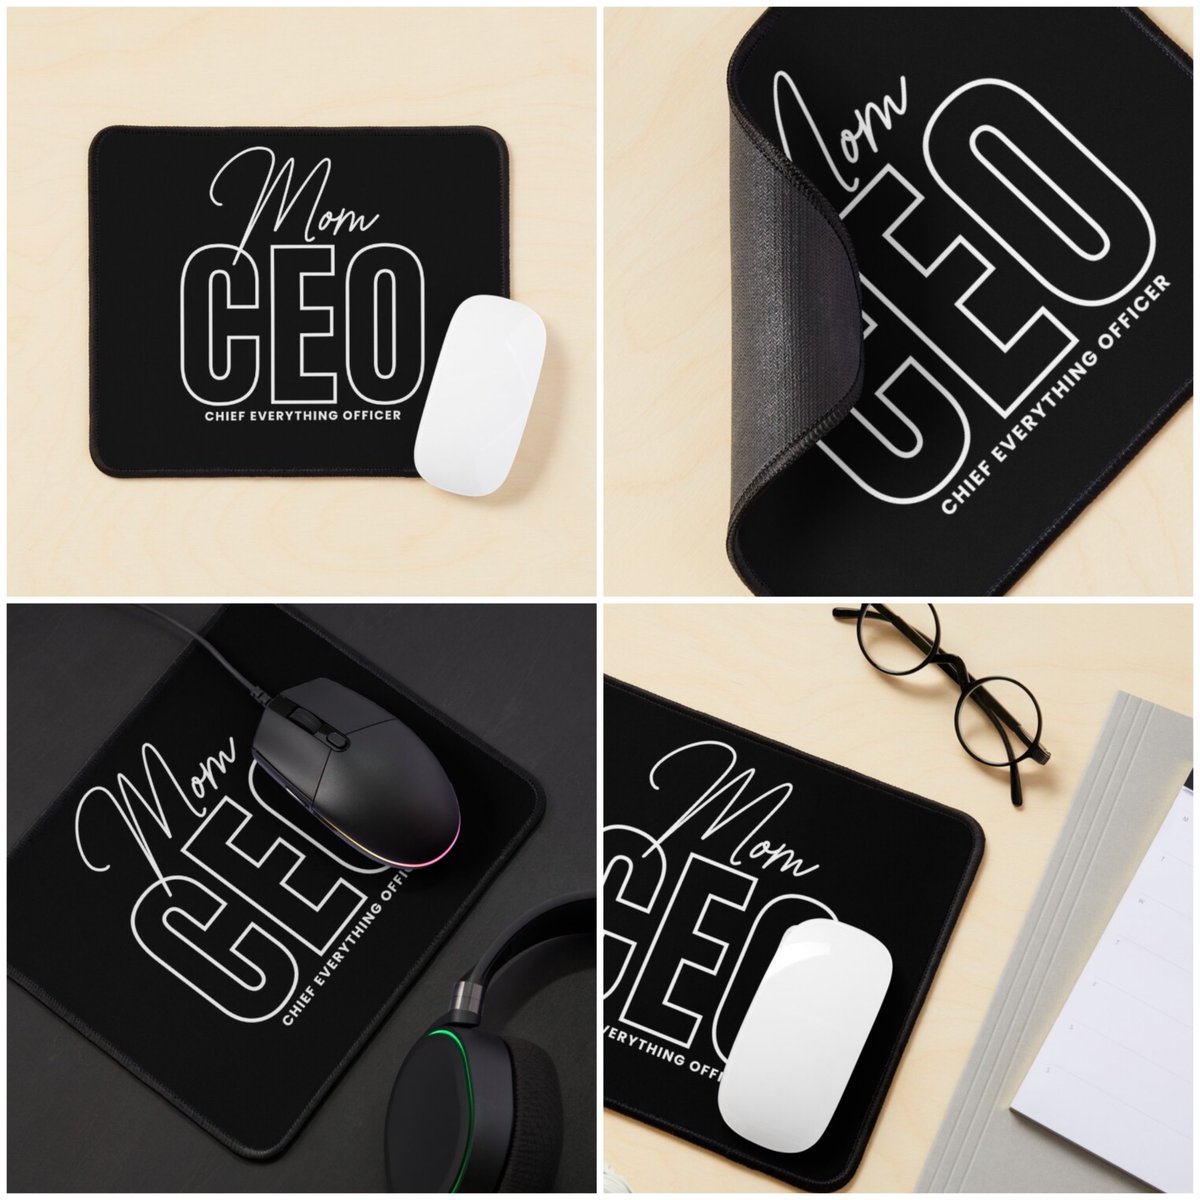 Mom CEO Mouse Pad

redbubble.com/i/mouse-pad/Mo…

Shop Collection: redbubble.com/shop/ap/160425…

#redbubble #redbubbleshop #art #prints #mom #mothersday #happymothersday #giftsformom #ceo #humor #fun #mother #mothersdaygiftideas #giftideasformom #officesupplies #accessories #mousepad